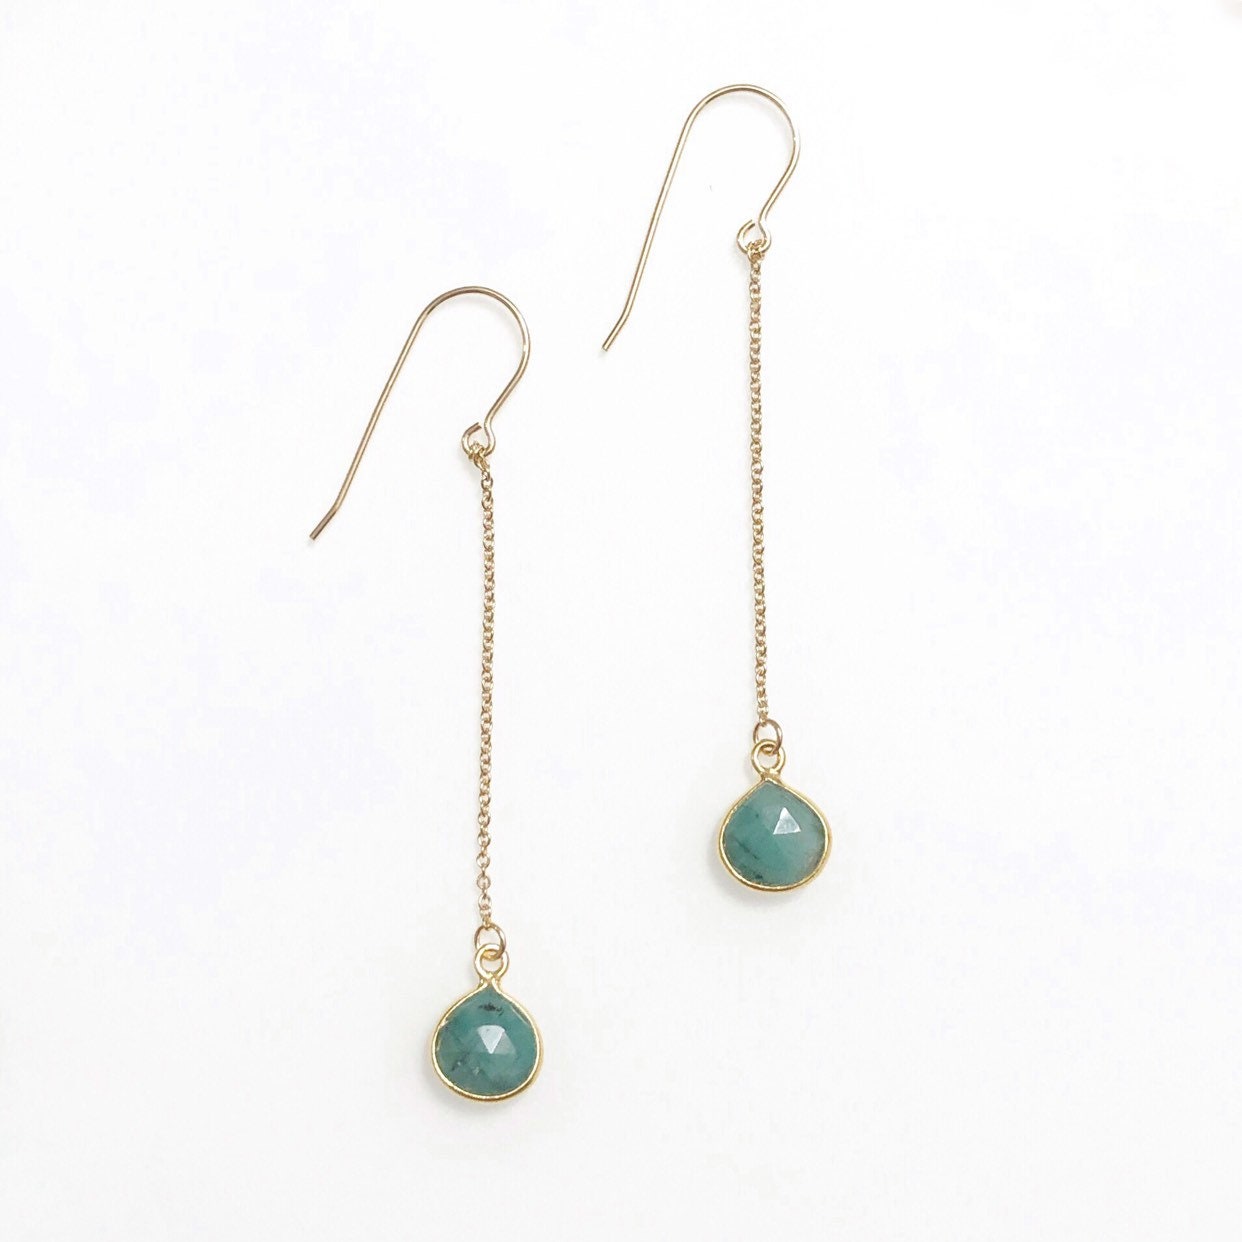 Clear quartz, emerald, chocolate moonstone, Dendrite opal, or onyx drop earrings (14kt gold-filled and gold vermeille)